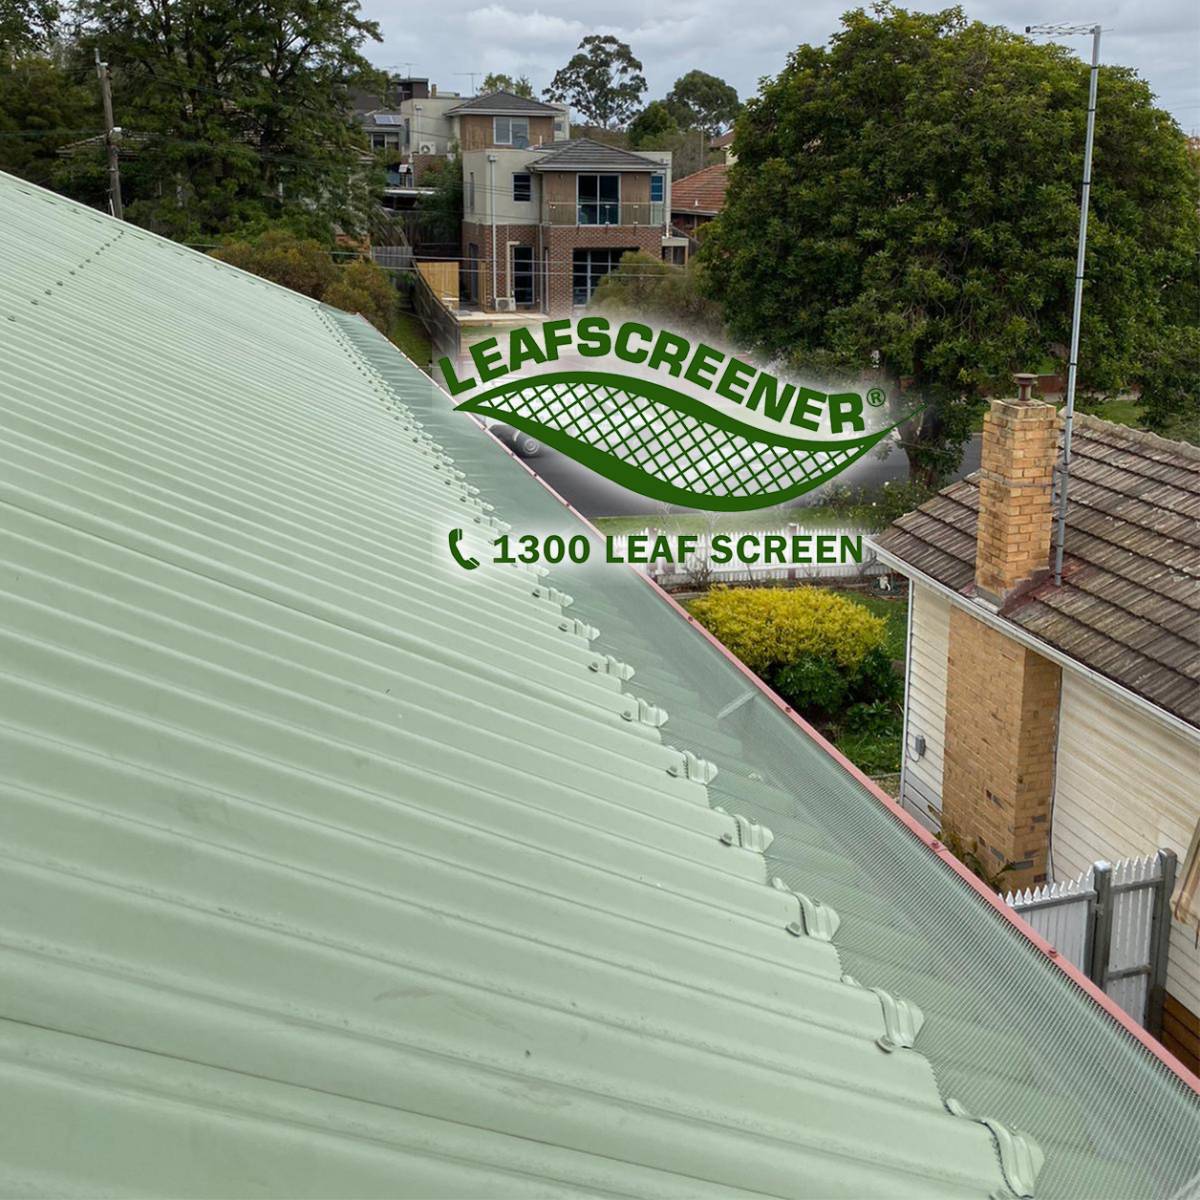 Corrugated roof protected by LEAFSCREENER®